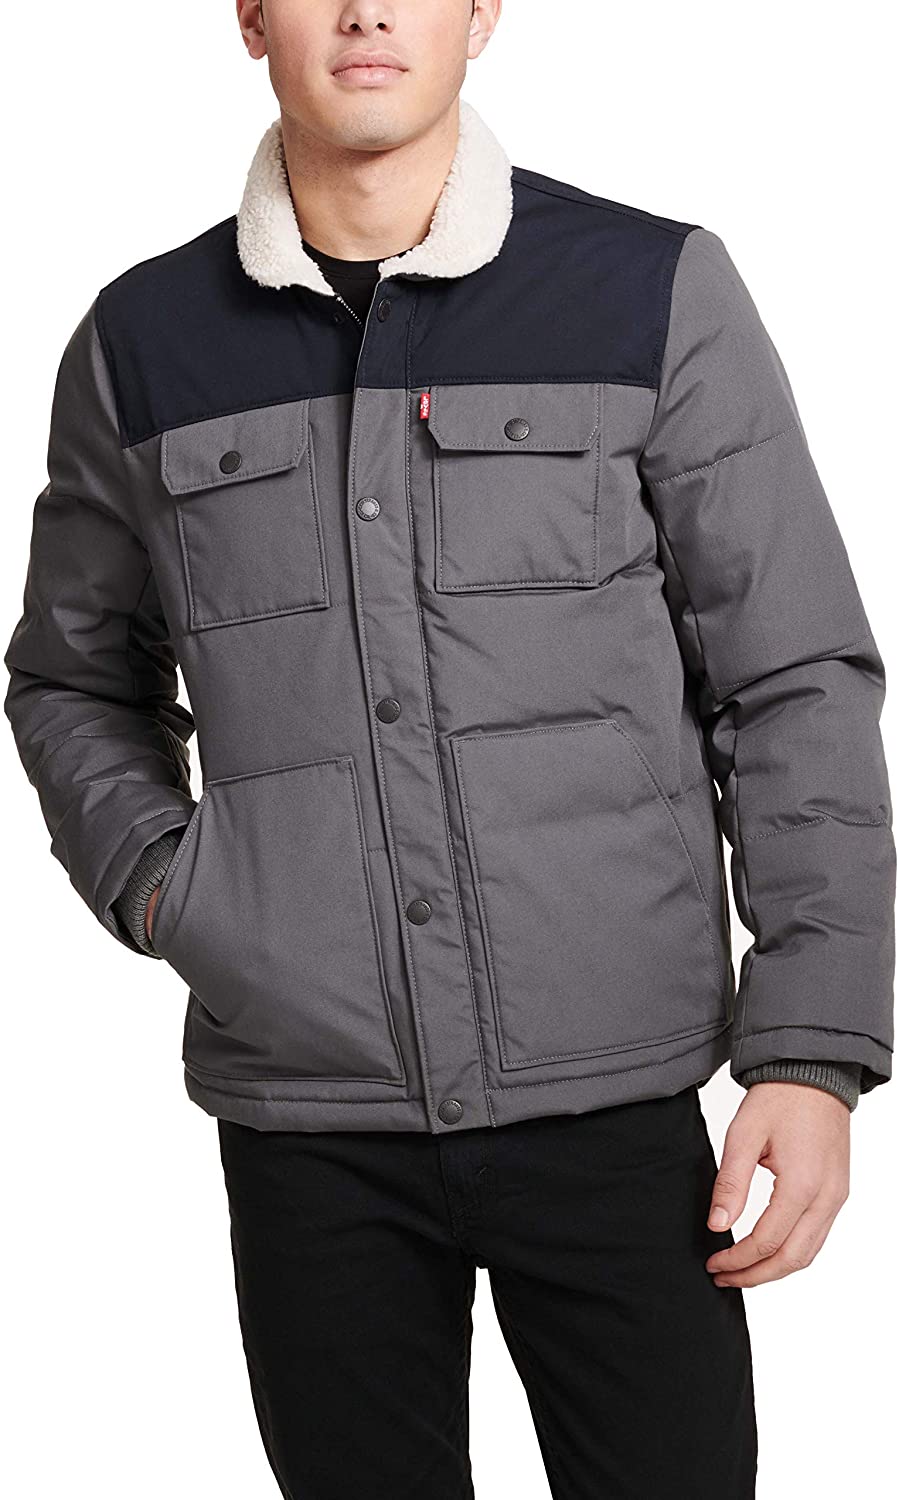 Levi's mens Quilted Mixed Media Shirttail Work Wear Puffer Jacket | eBay